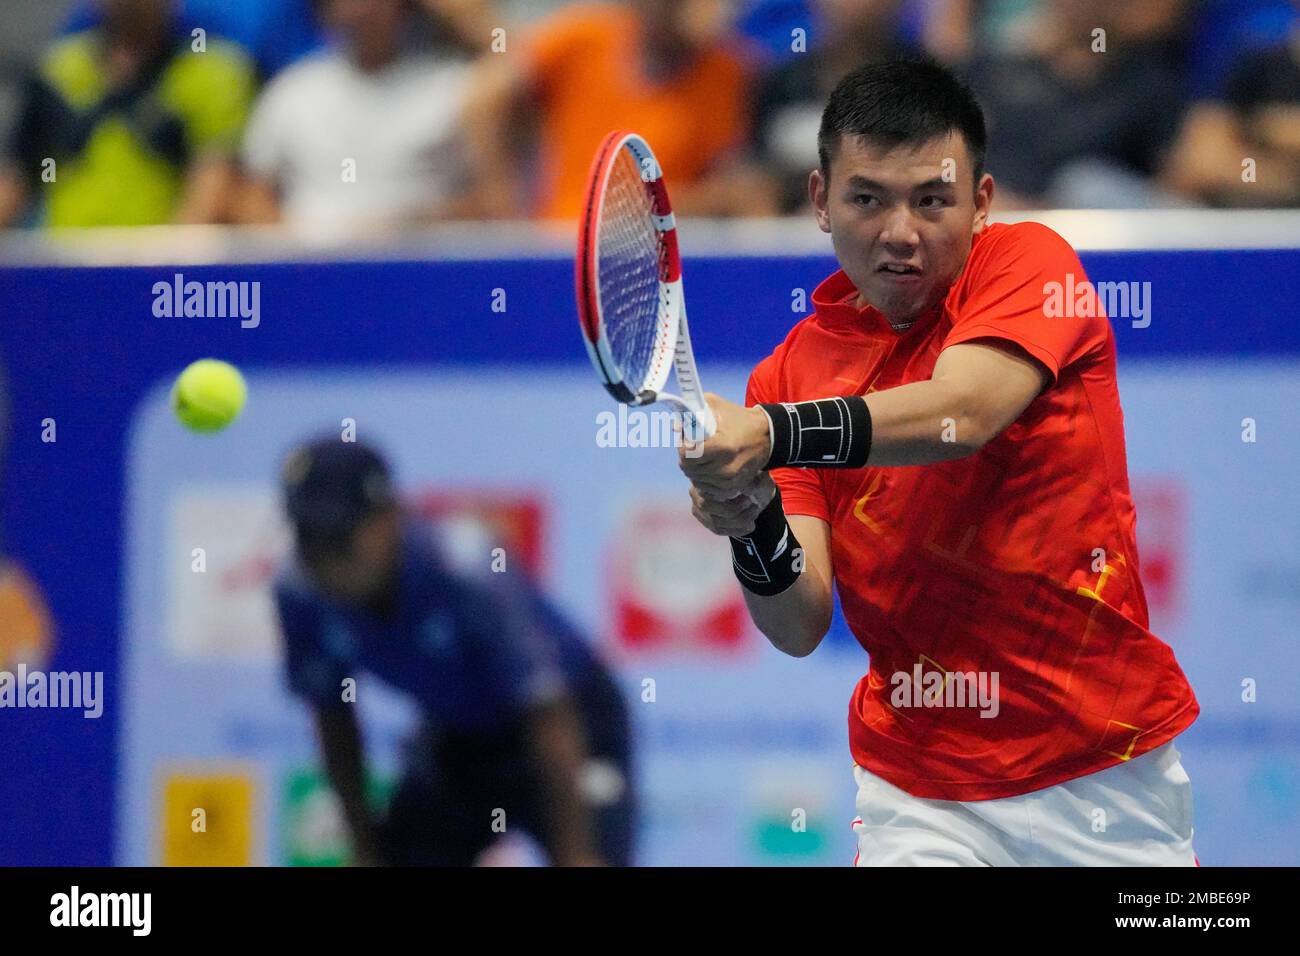 Nam Hoang Ly of Vietnam returns a ball to Yuttana Charoenphon of Thailand during their mens singles semi-final tennis match at the 31st Southeast Asian Games (SEA Games 31) in Bac Ninh,